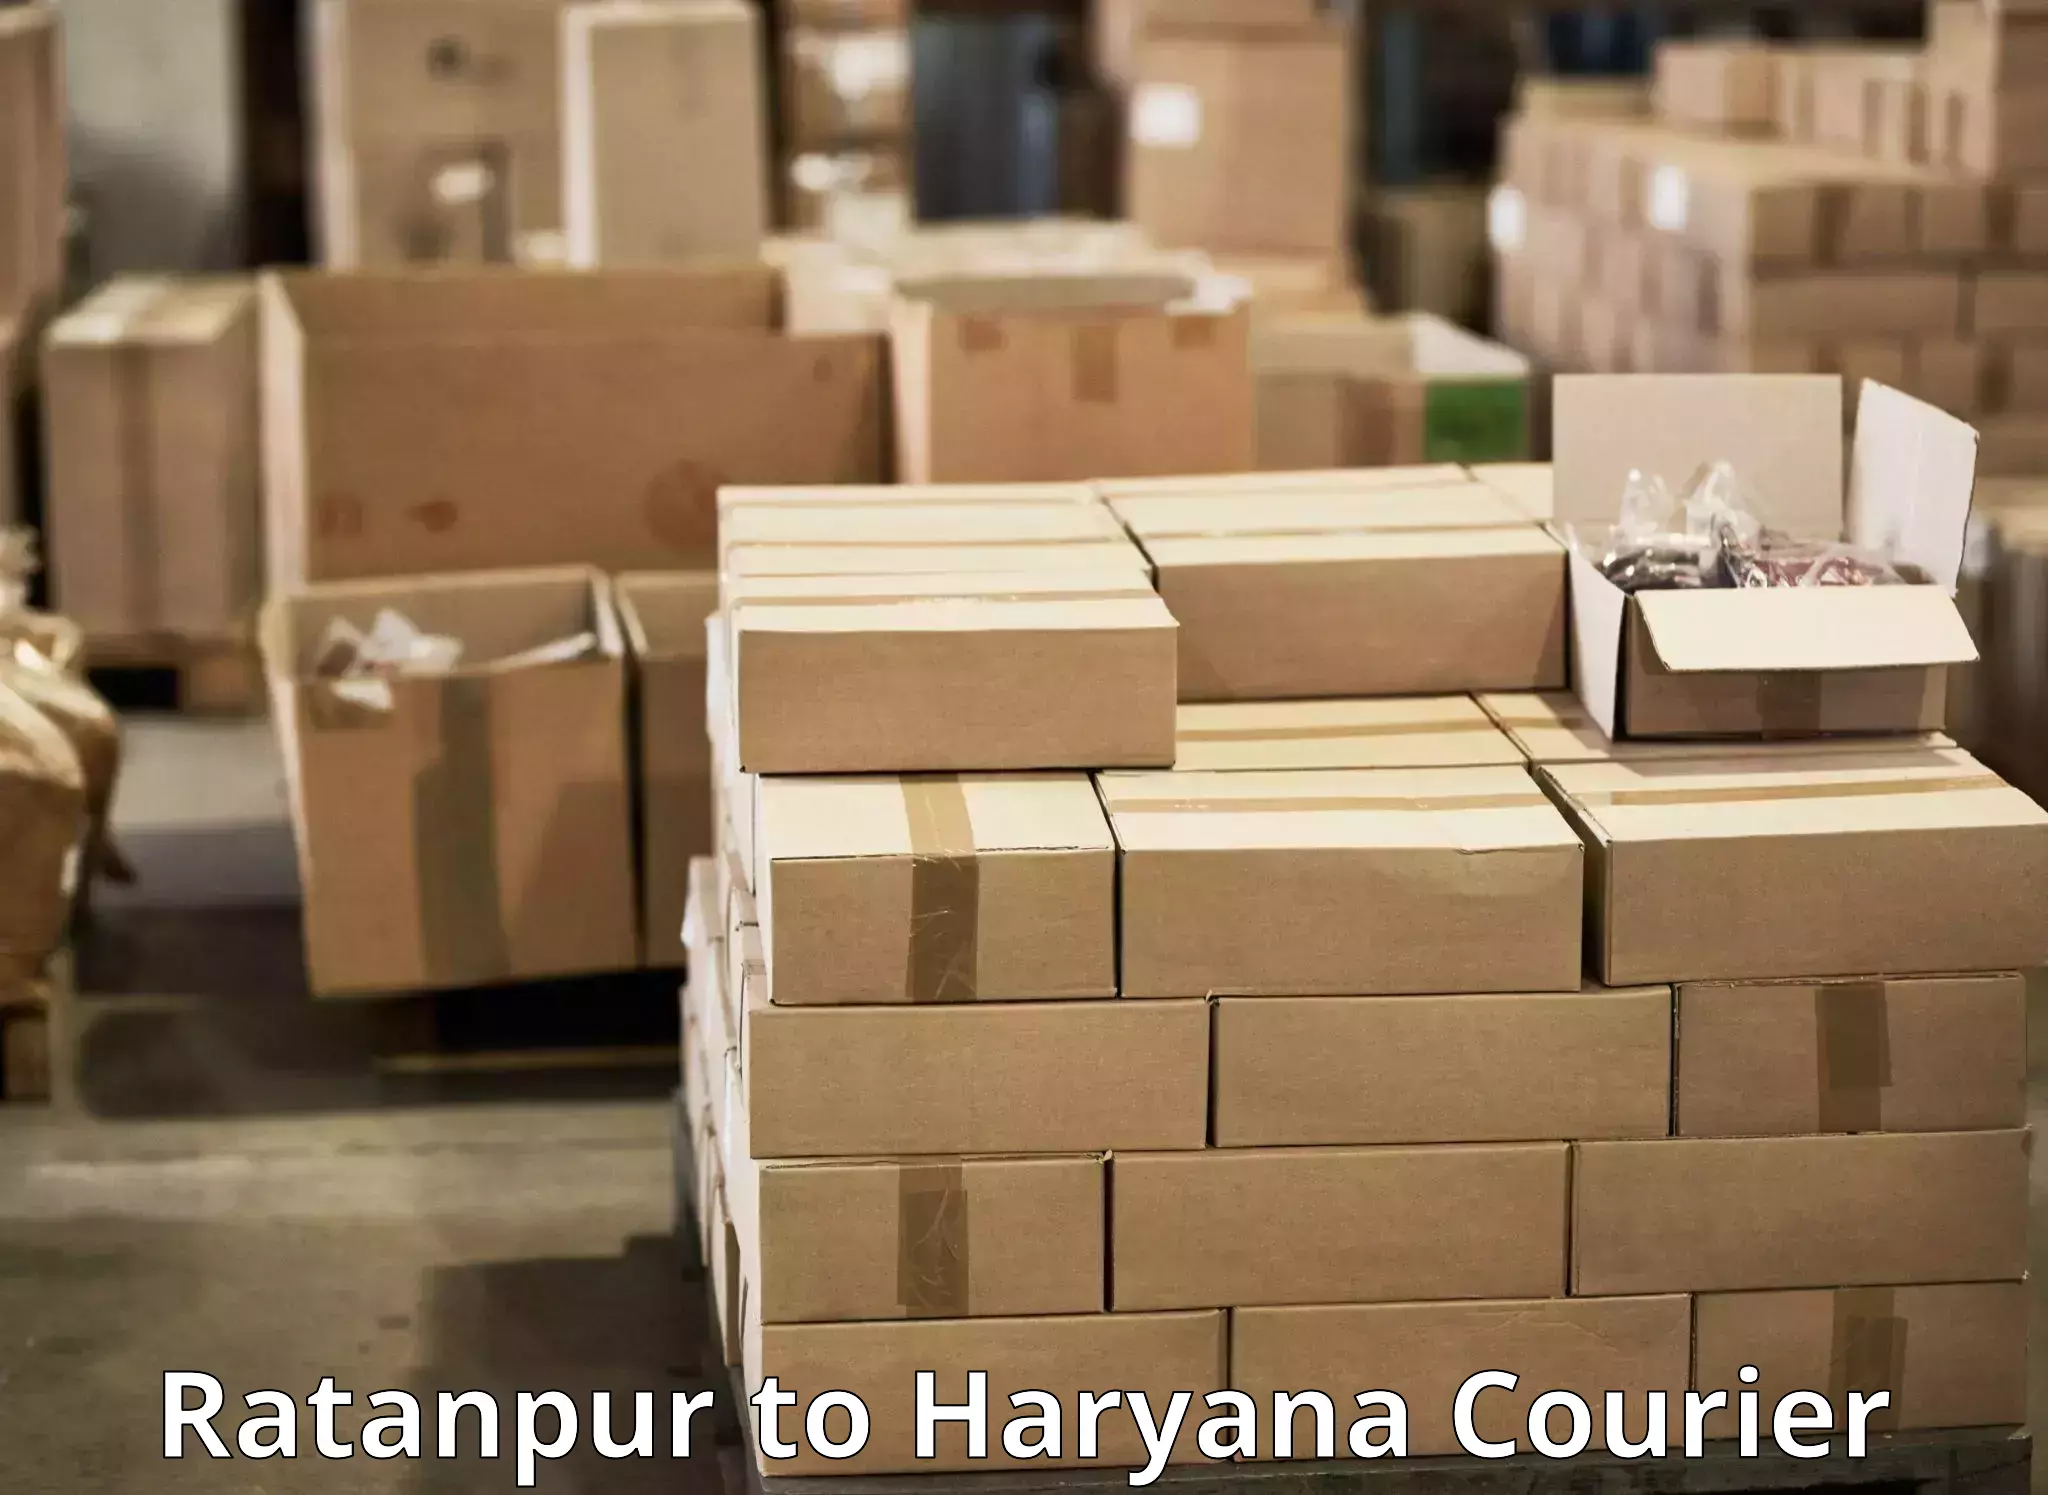 Overnight delivery services Ratanpur to Panipat